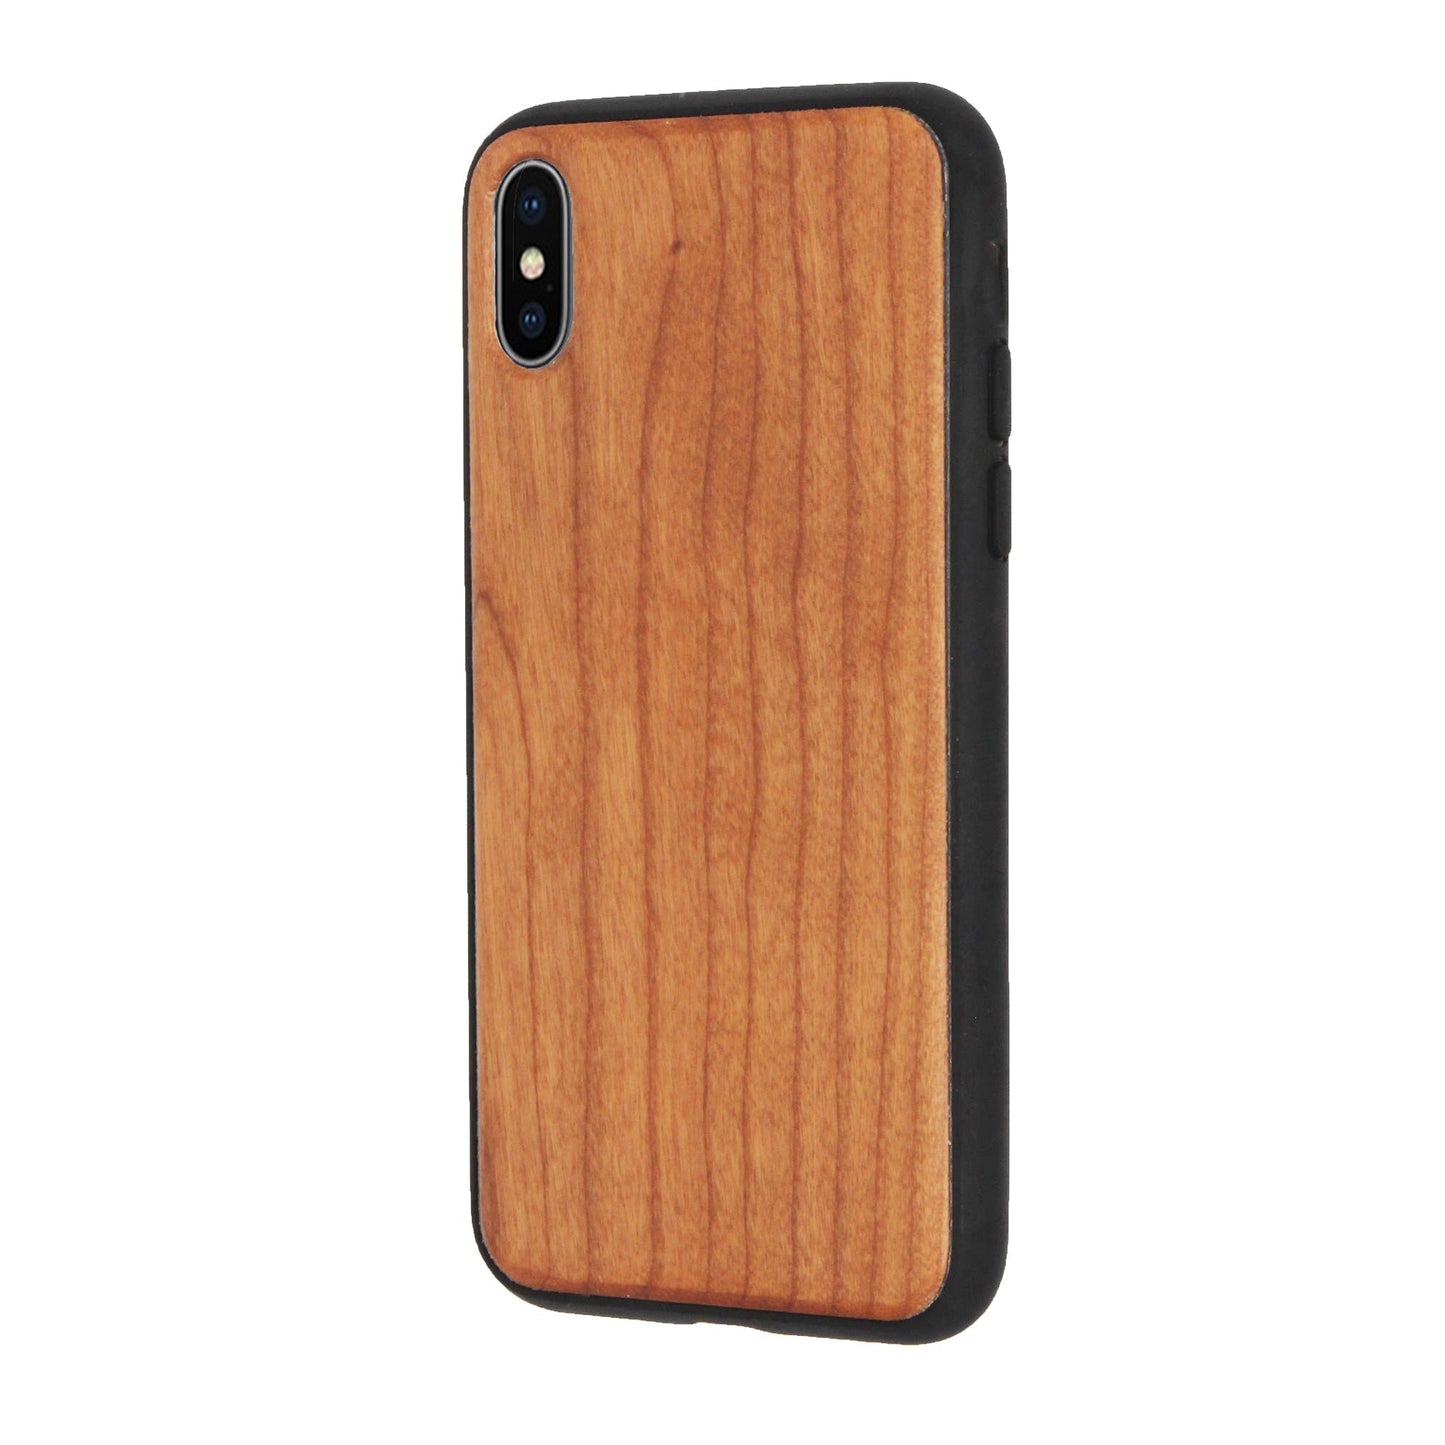 Eden case made of cherry wood for iPhone XS Max